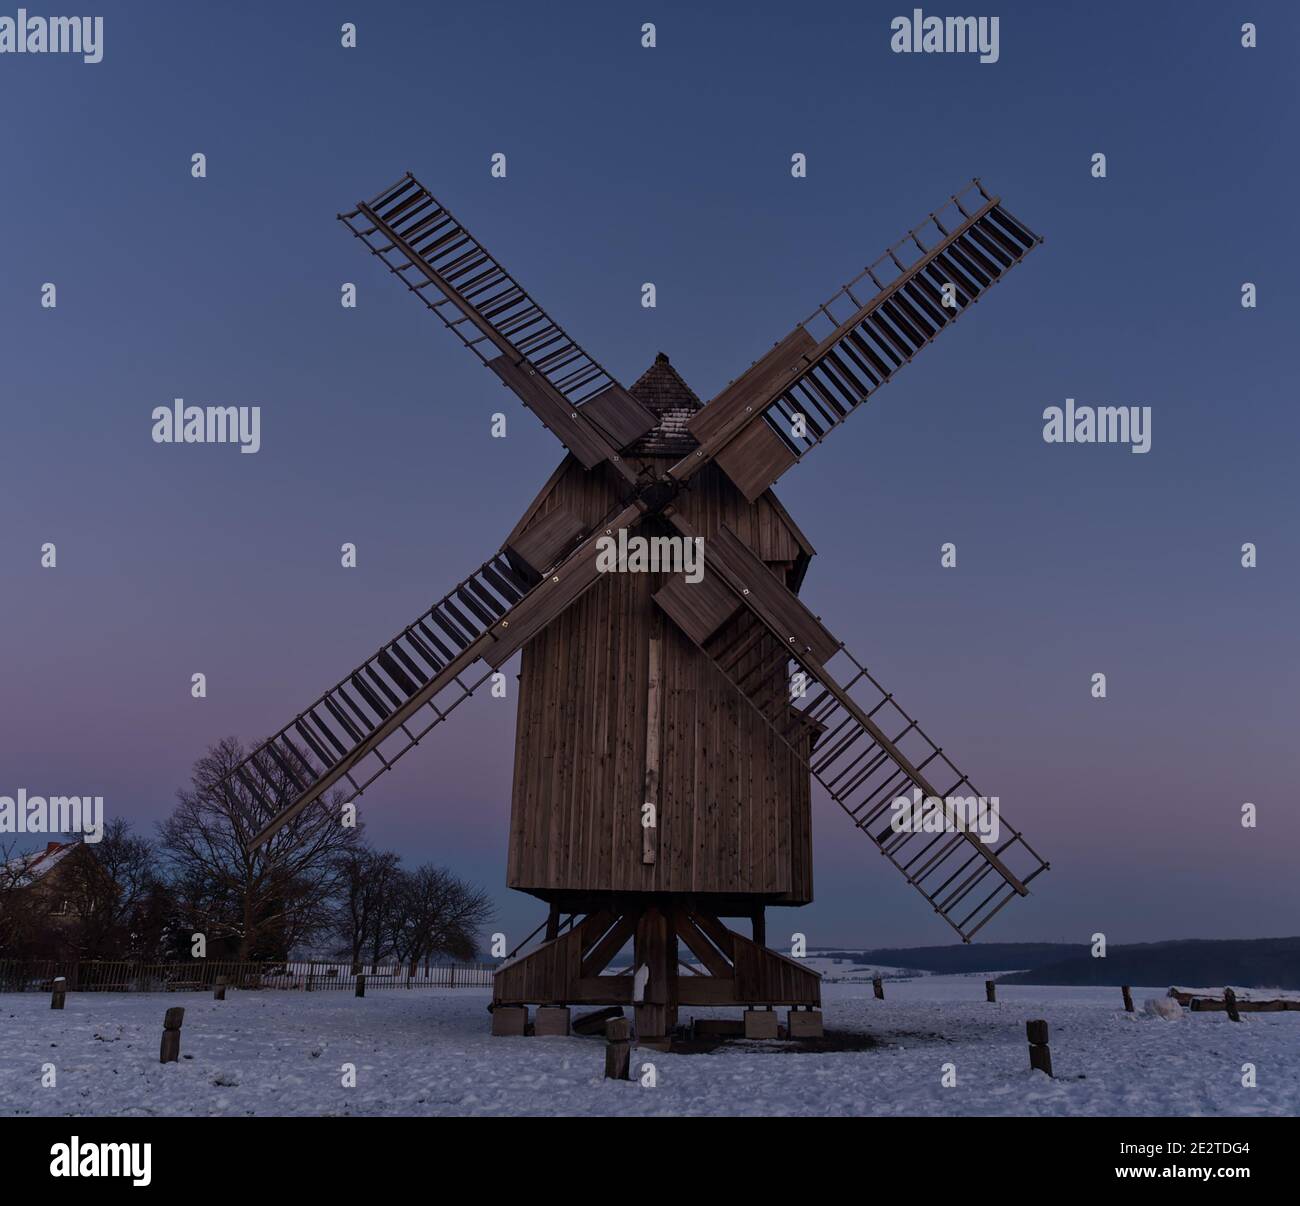 Bockwindmill in krippendorf thuringia at winter historical landscape format Stock Photo